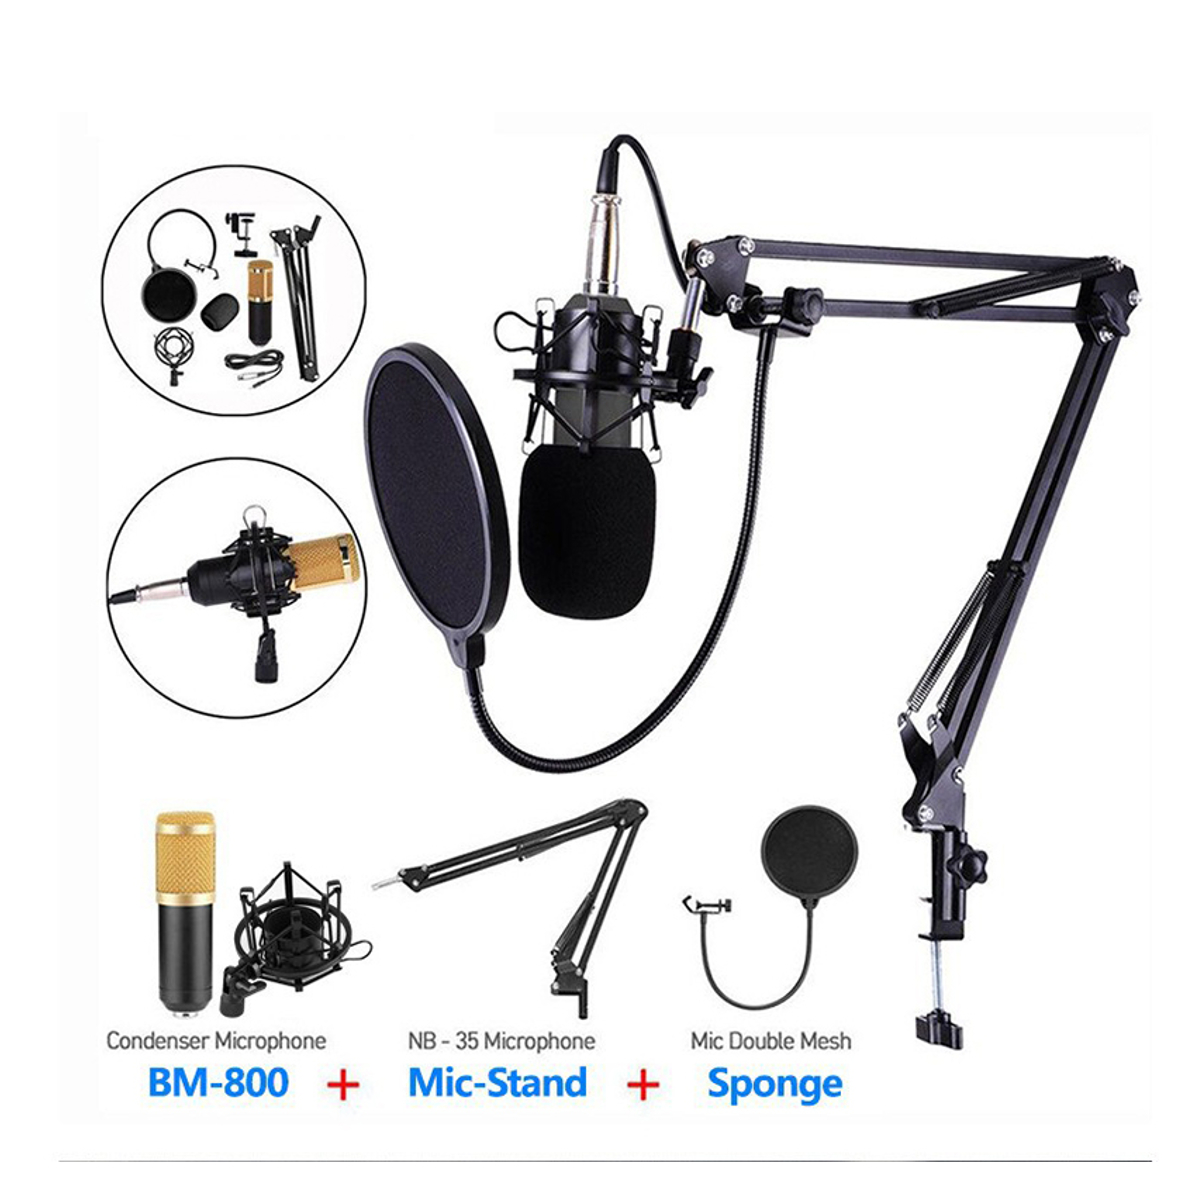 BM800 Condenser Microphone V8 Sound Card Kit Muti-functional bluetooth Sound Card for Studio Mobile Phone PC Laptop Recording Live Broadcast